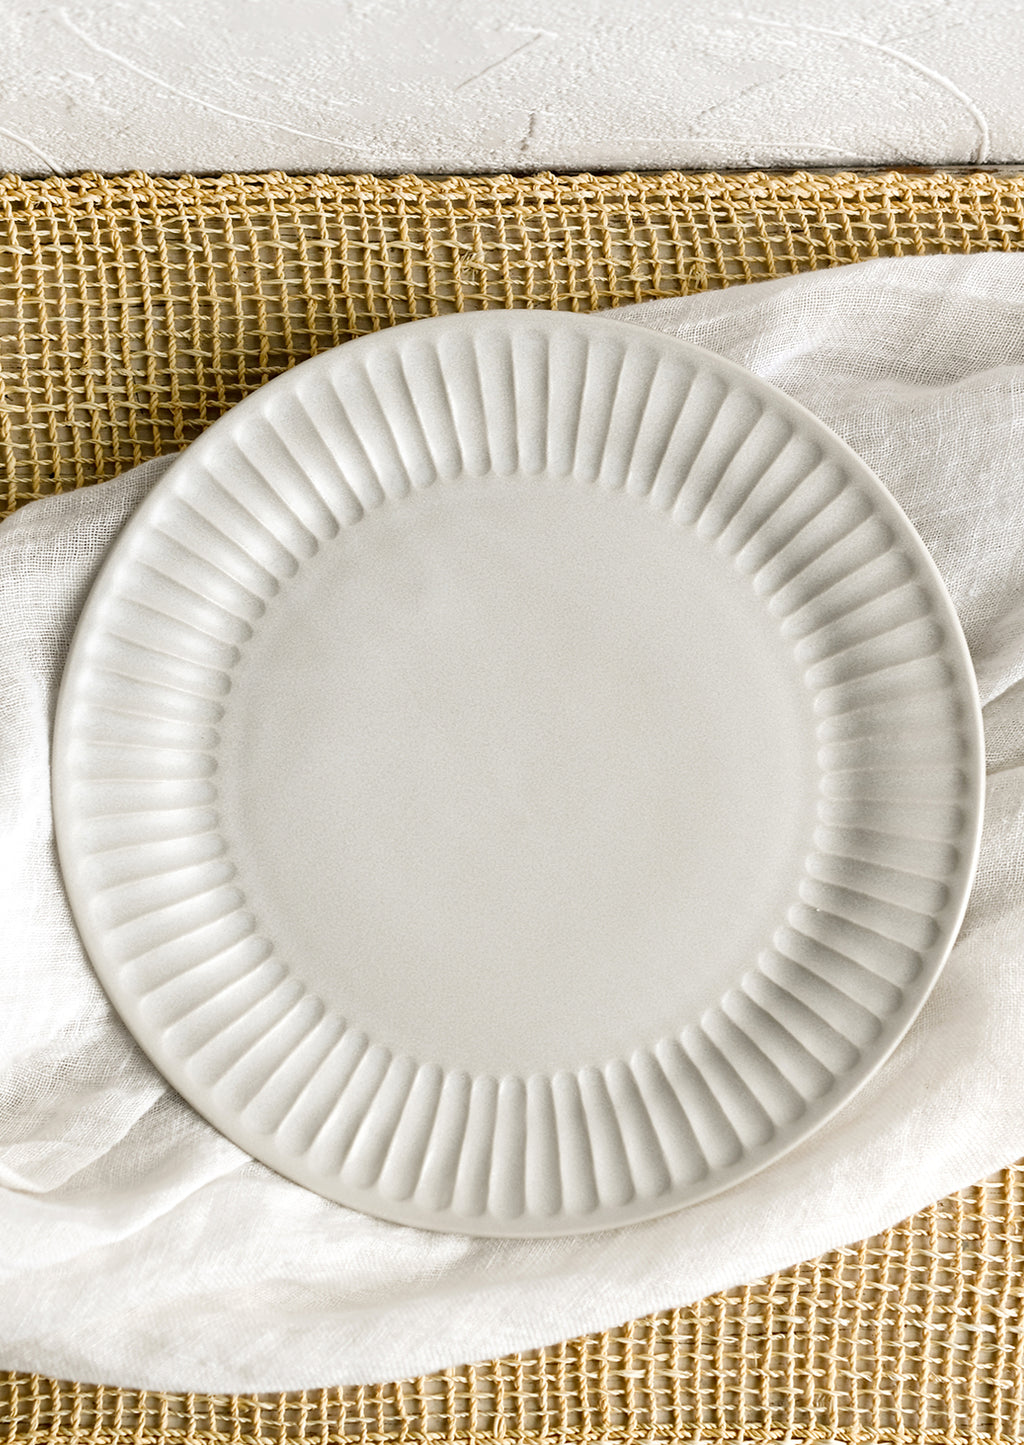 1: A white porcelain plate with fluted texture around rim.